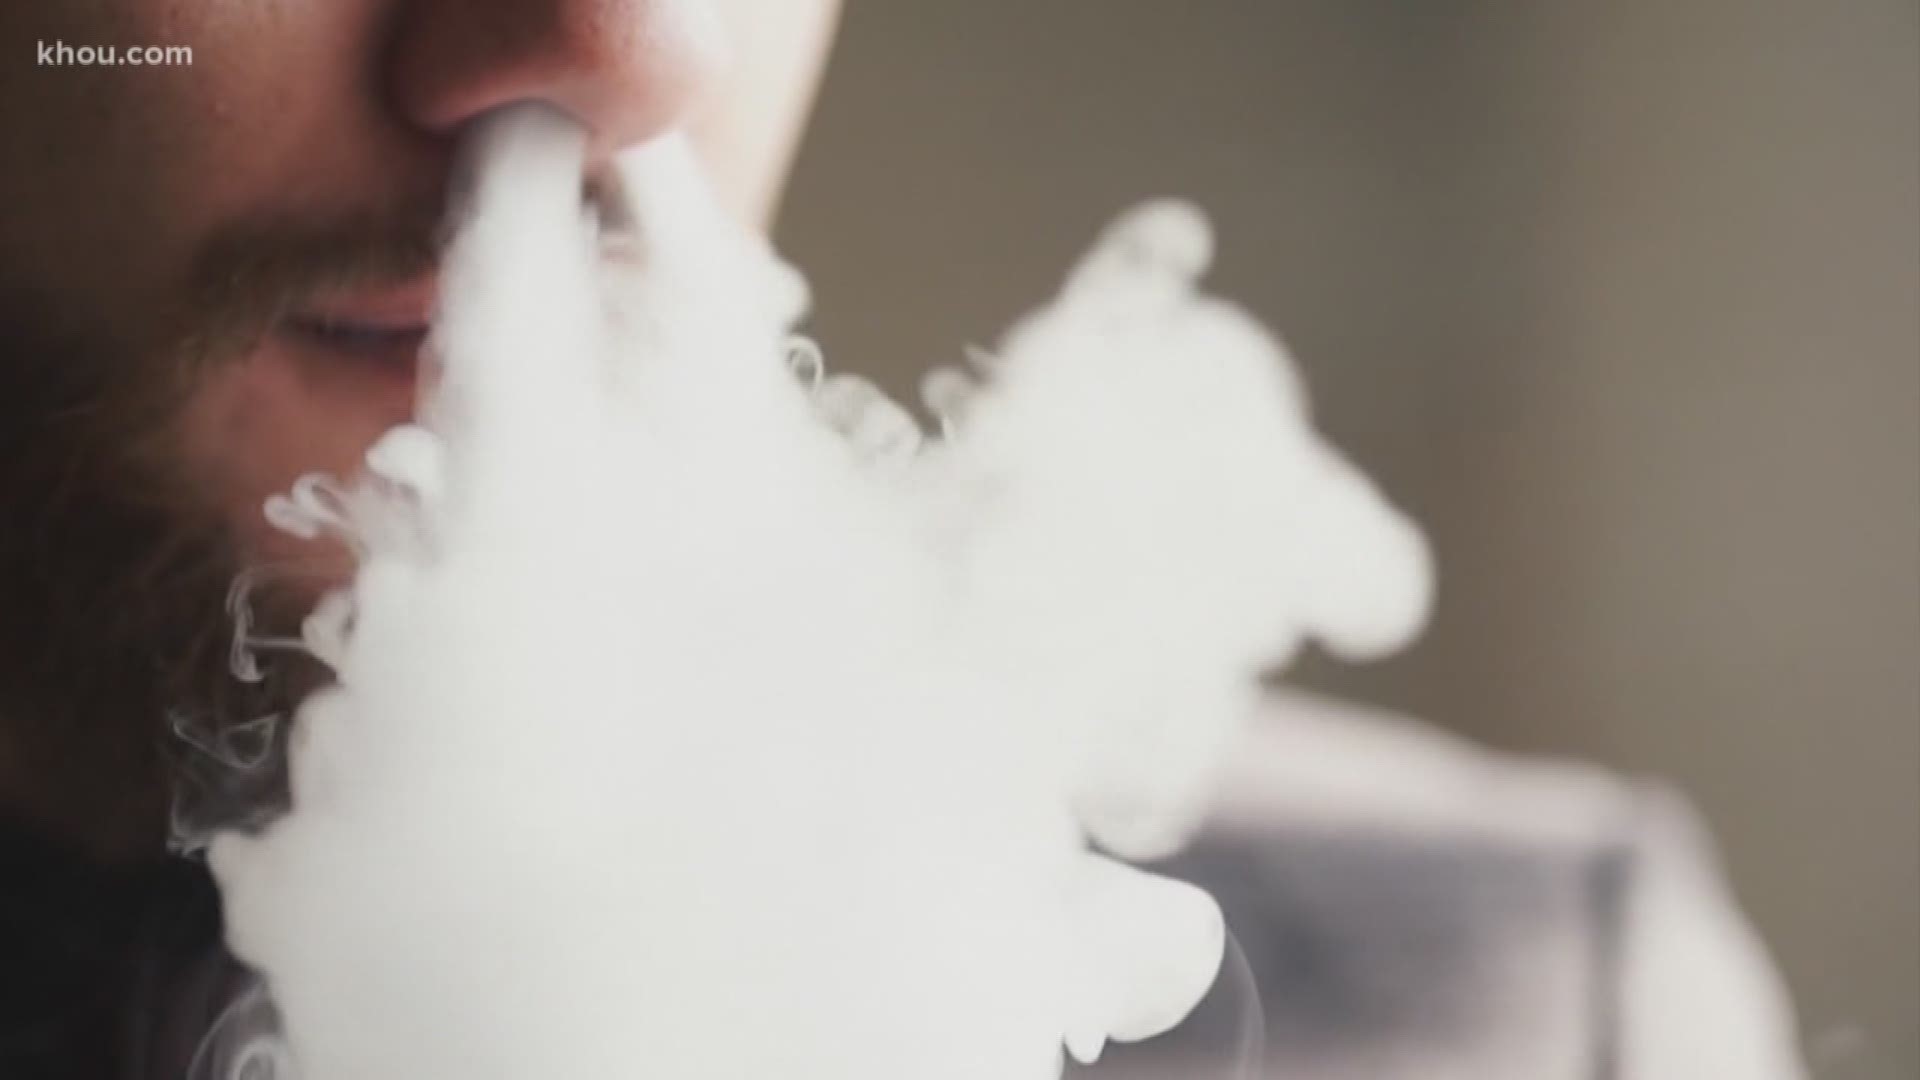 A new Texas law set to take effect on September 1 raises the legal age for someone to purchase or possess nicotine products to 21 years old. With the CDC calling teen and youth use of vapes and e-cigarettes an "epidemic," the Texas Department of State Health Services is warning parents about how vaping is different from other forms of smoking.